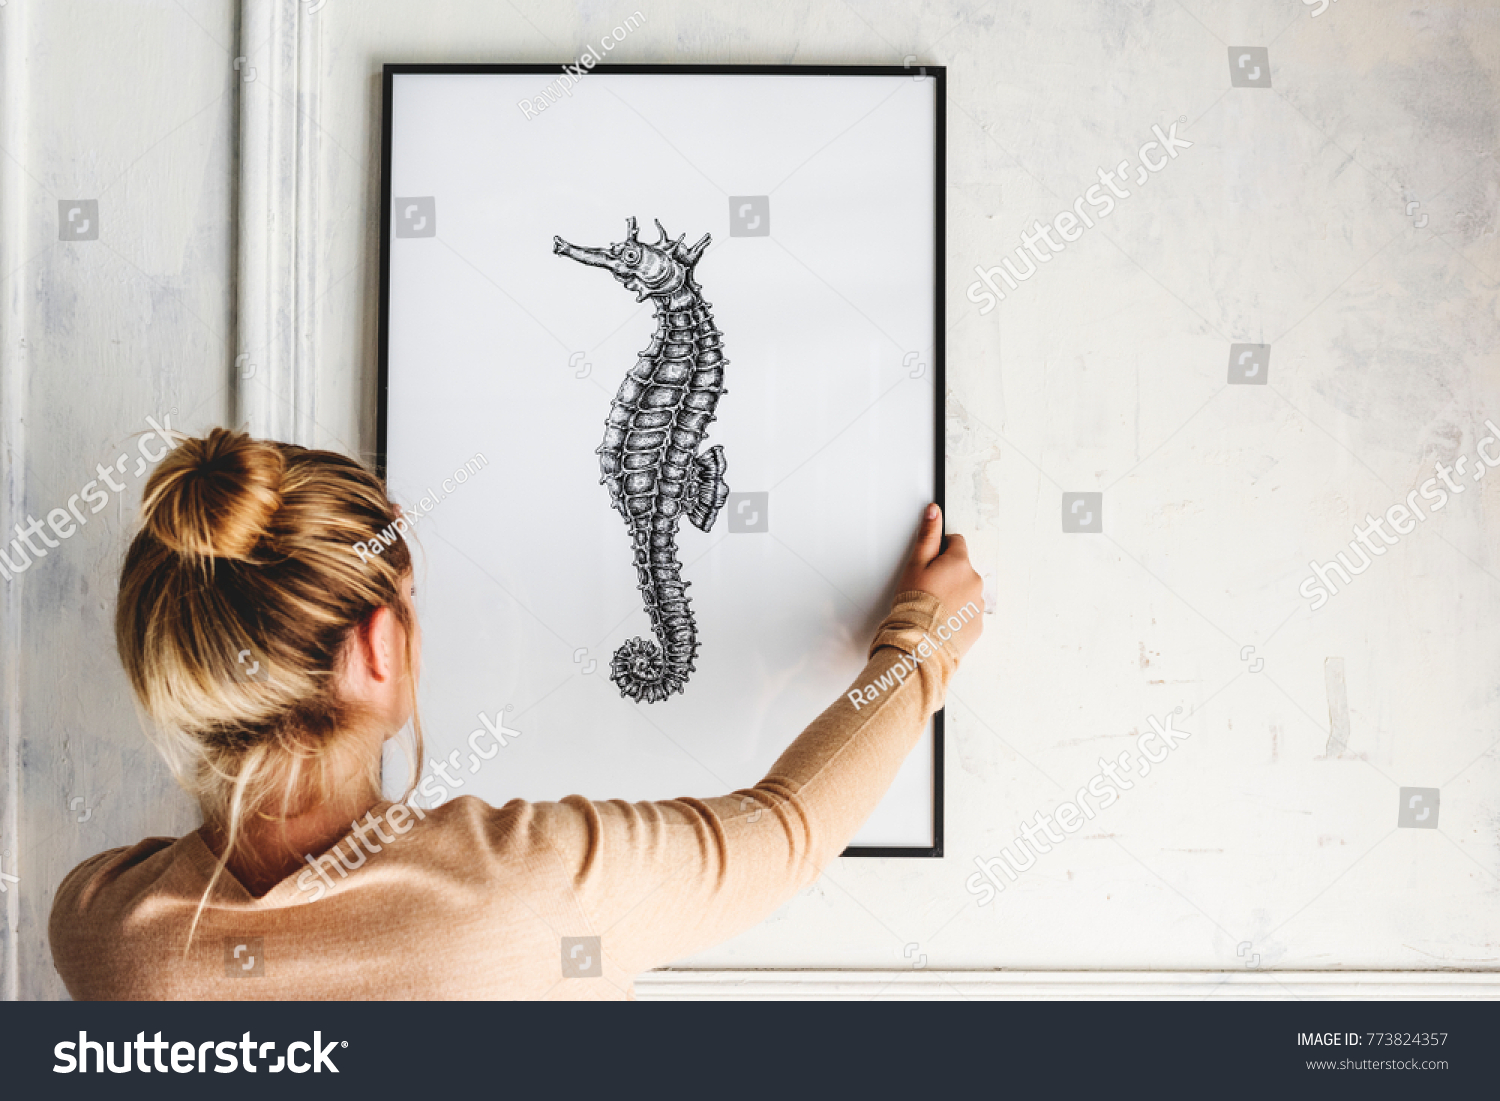 Photo of hand drawing seahorse is hanging on the wall #773824357